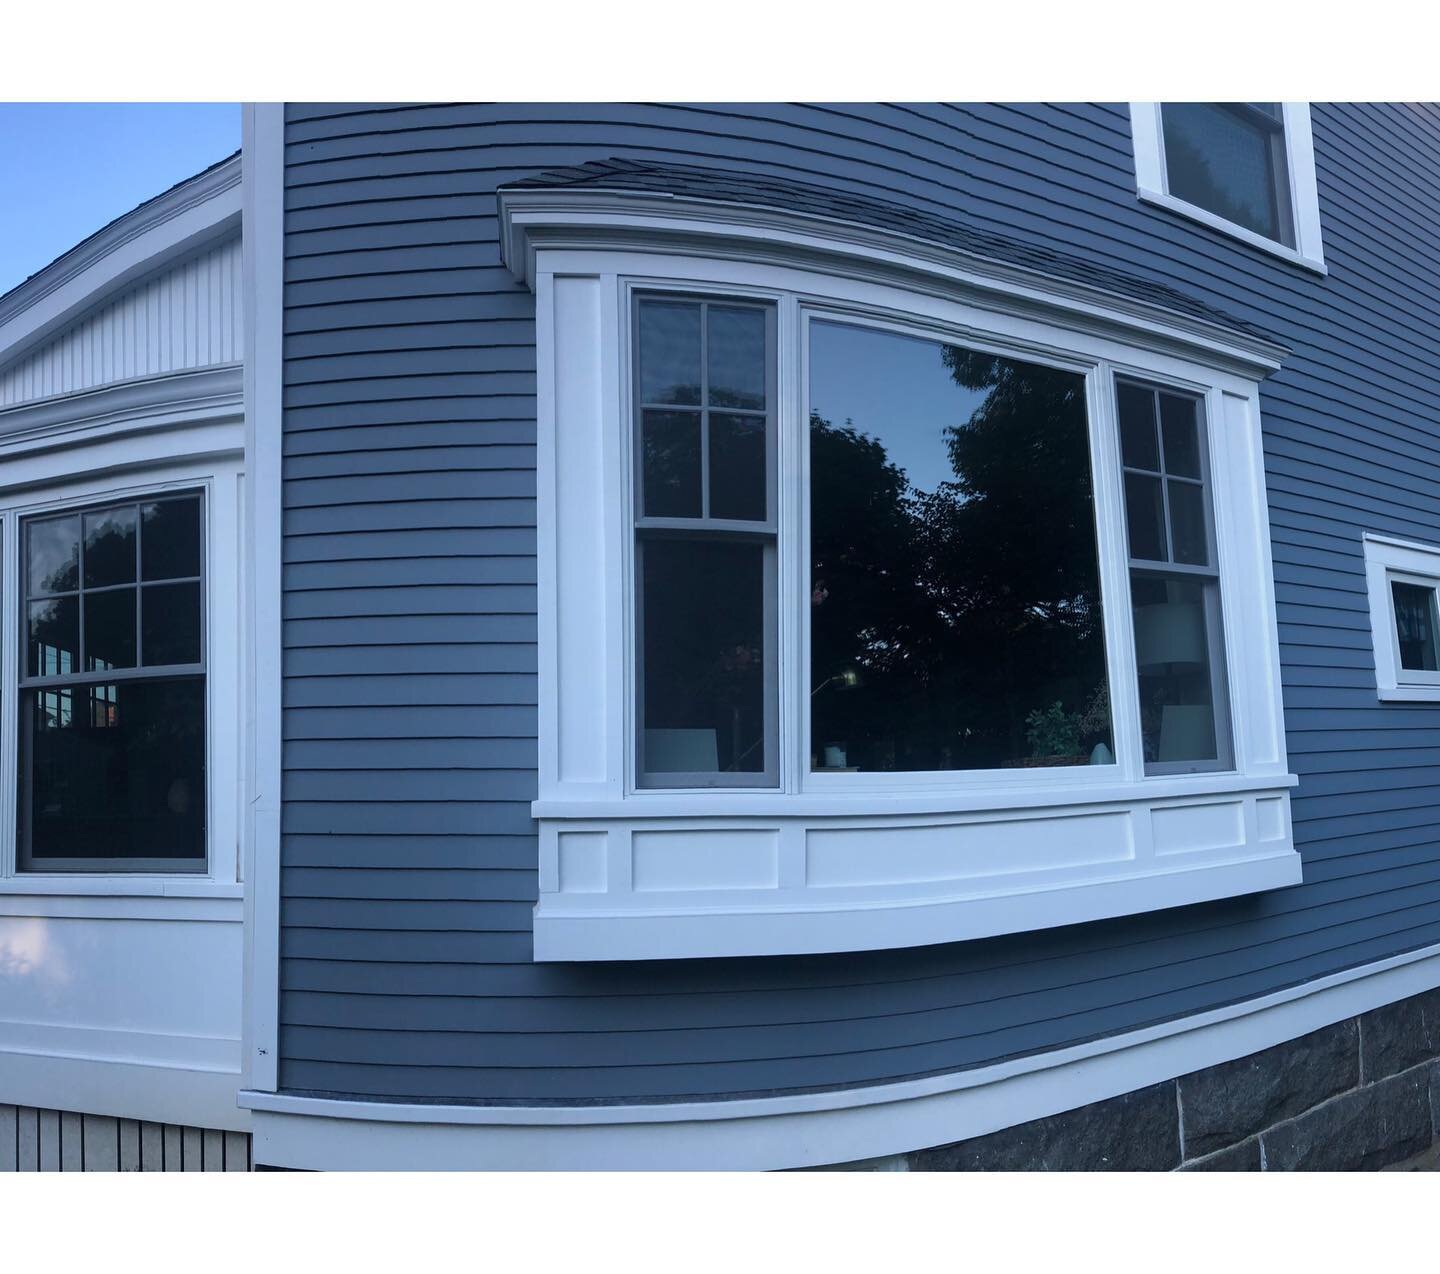 Looking for more natural light? ☀️ This project removed a small double hung window and added a bank of larger windows with all new exterior trim details and roof line. All windows pictured are manufactured by Marvin and supplied by our friends at Hin